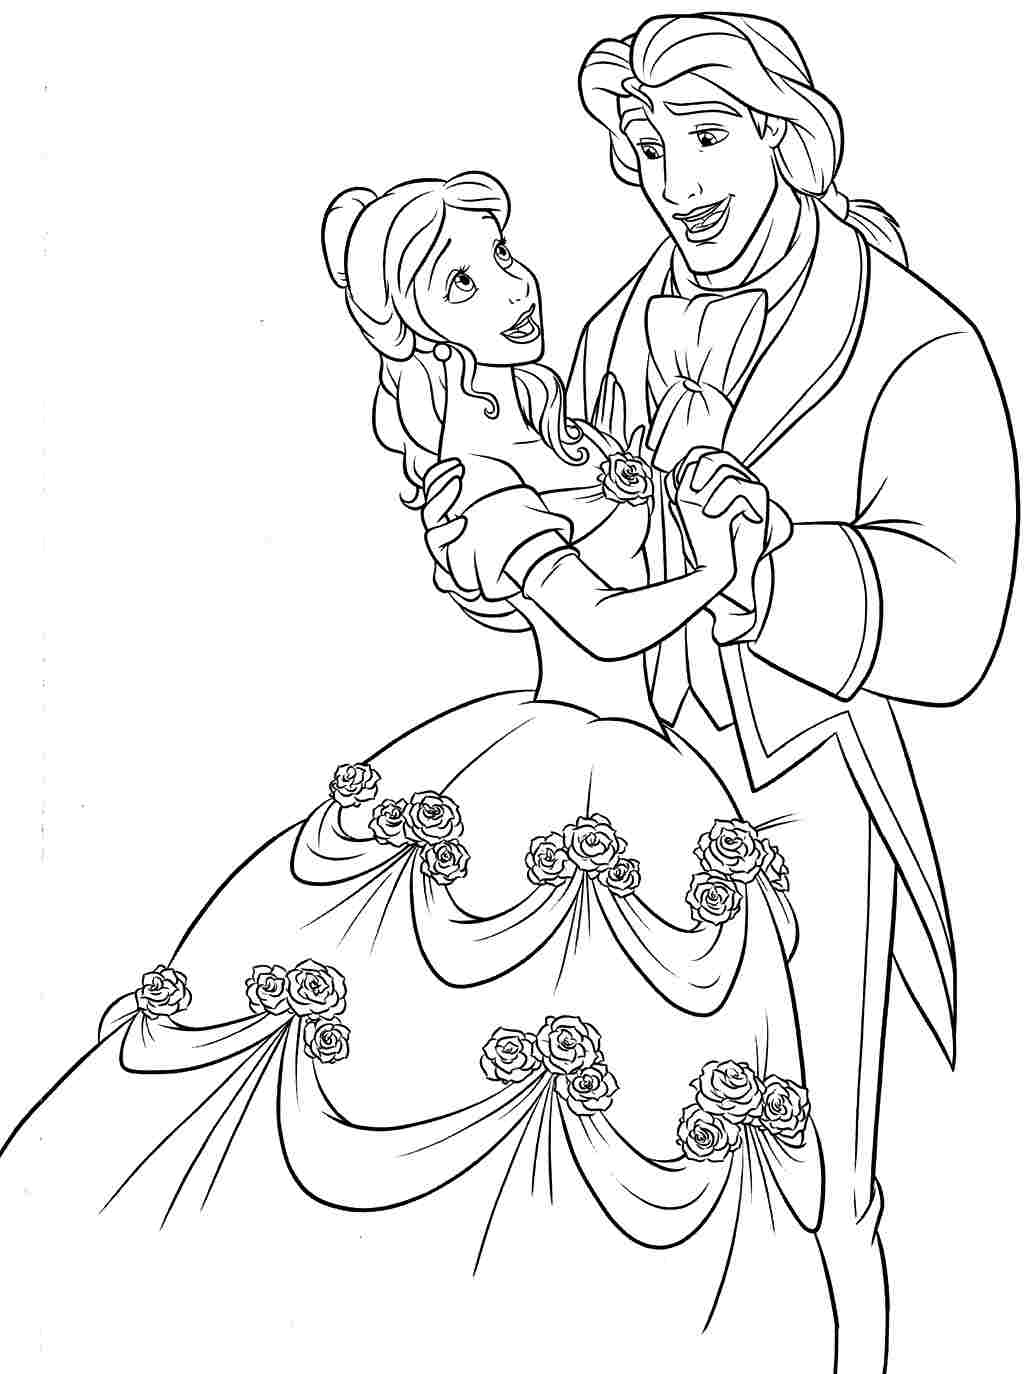 drawing the beauty and the beast 130944 animation movies printable coloring pages